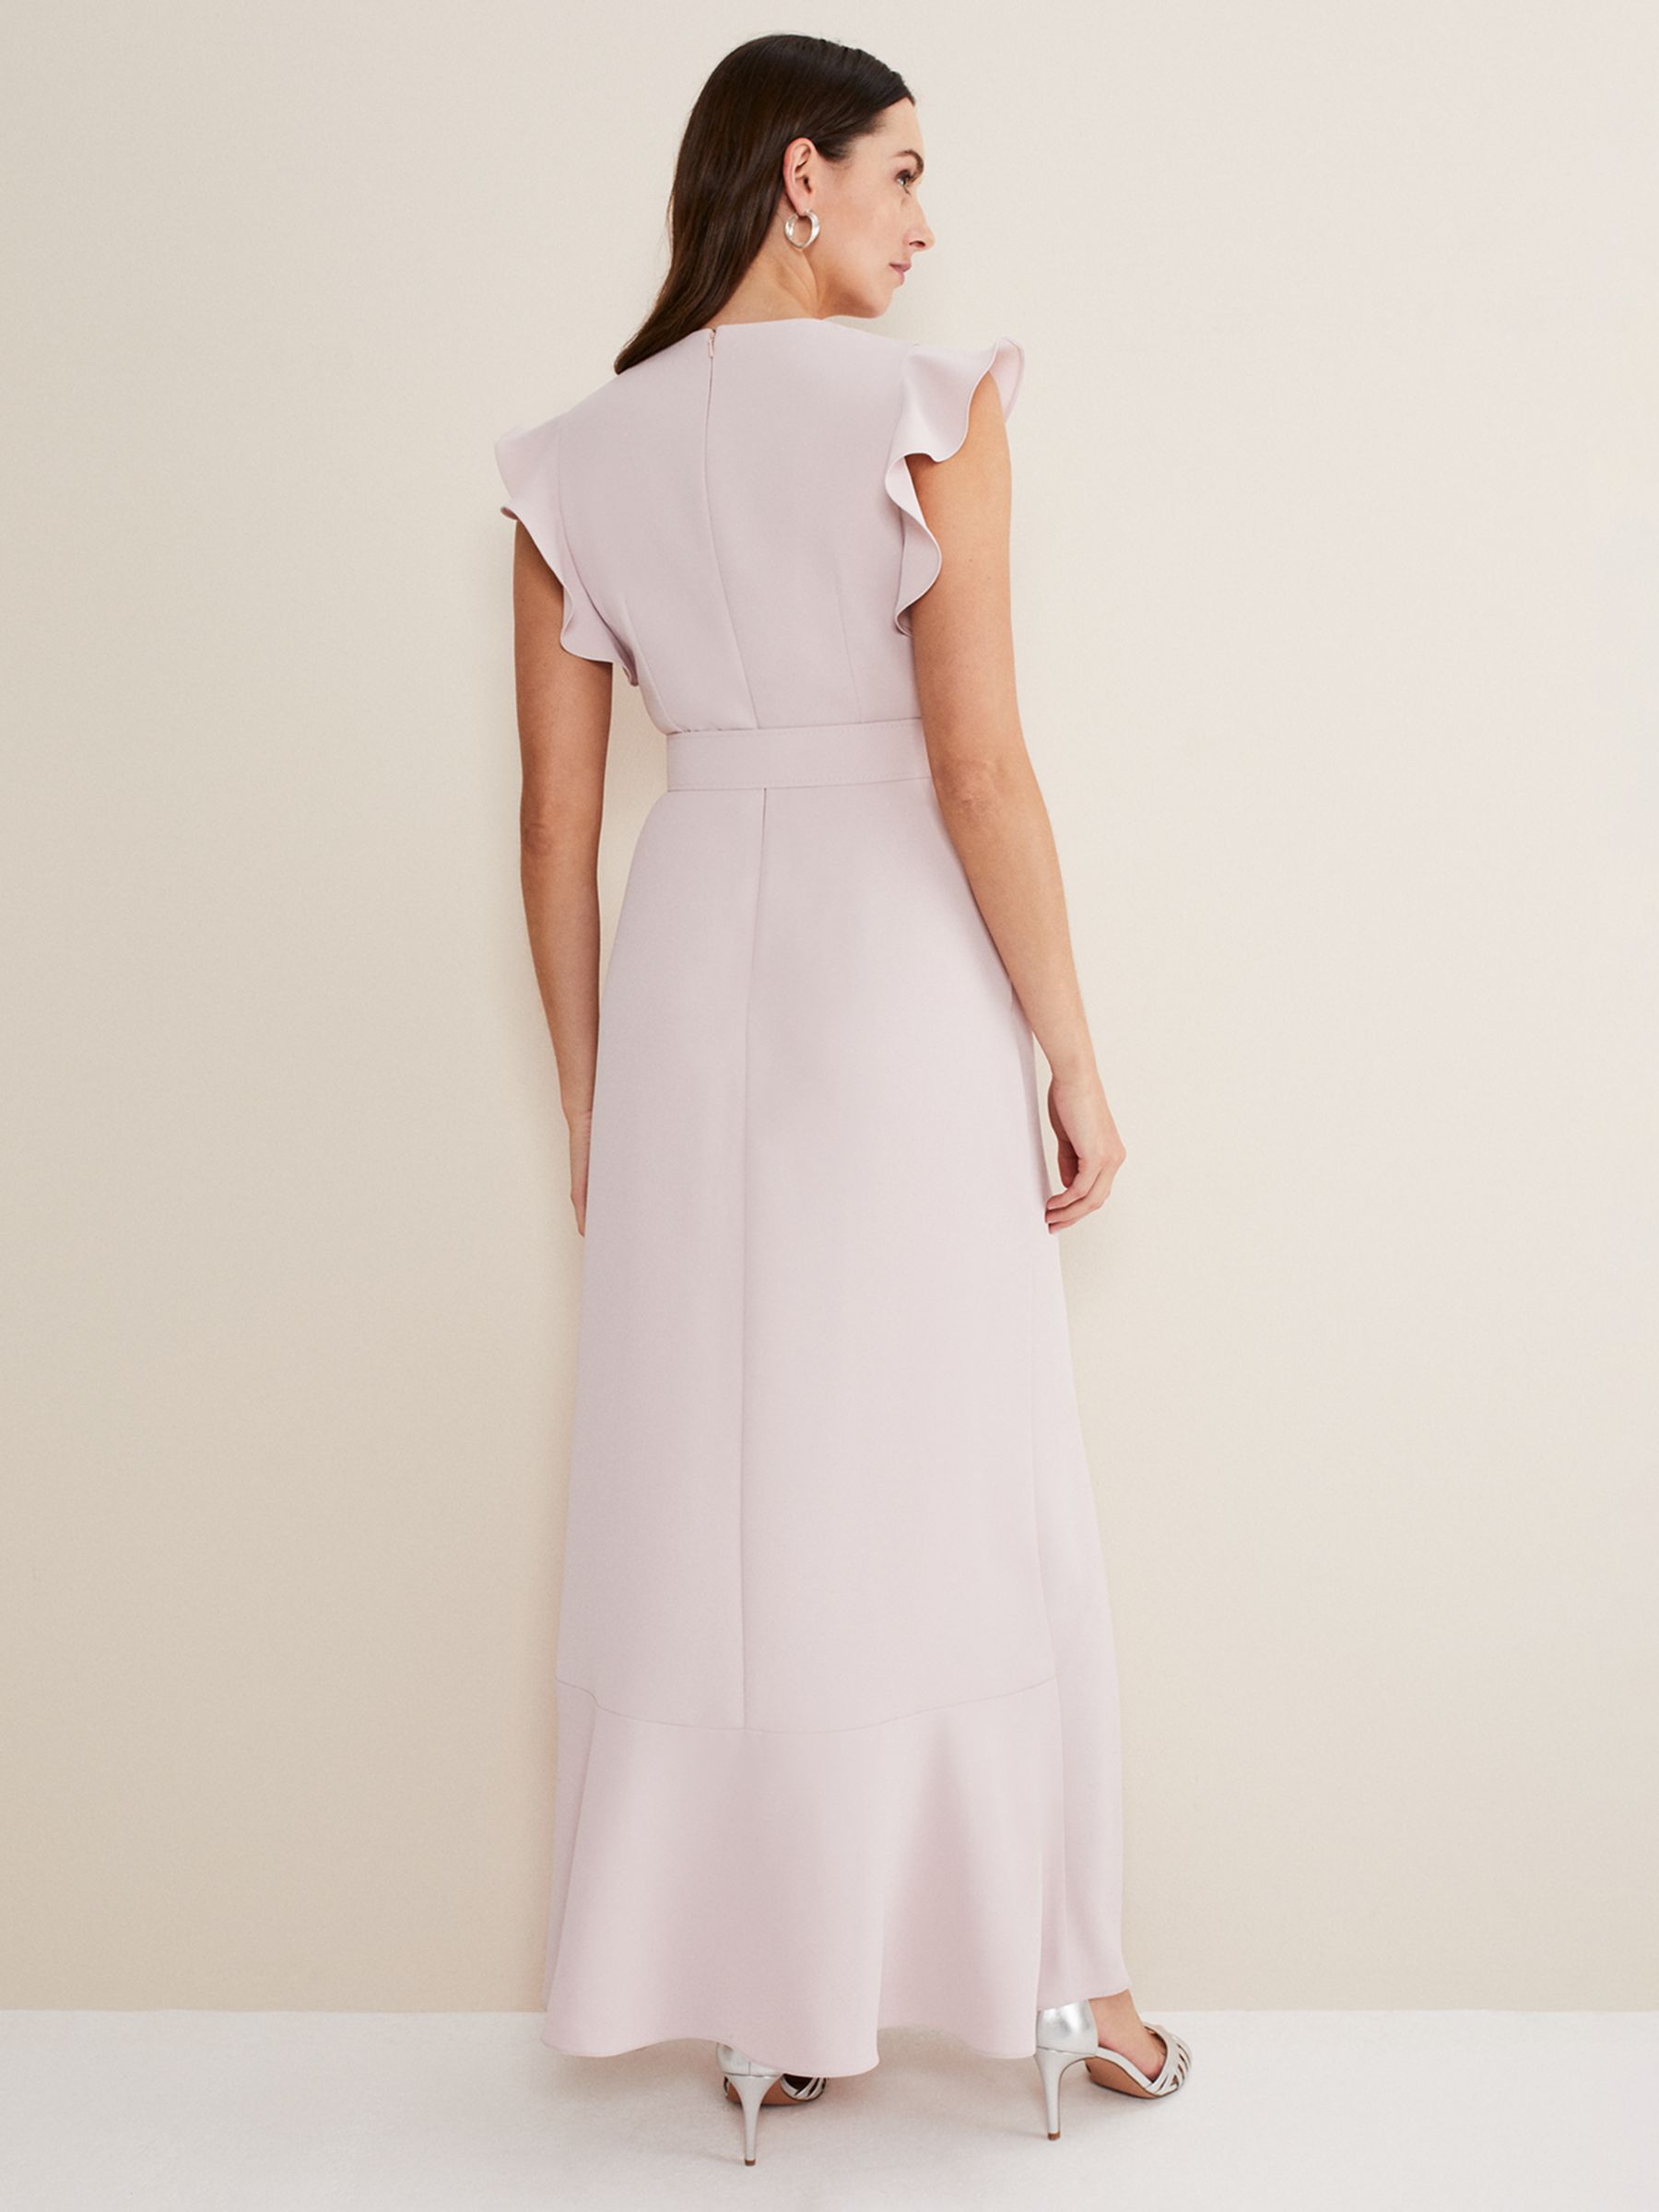 Phase Eight Phoebe Frill Belted Maxi Dress, Powder Pink, 6